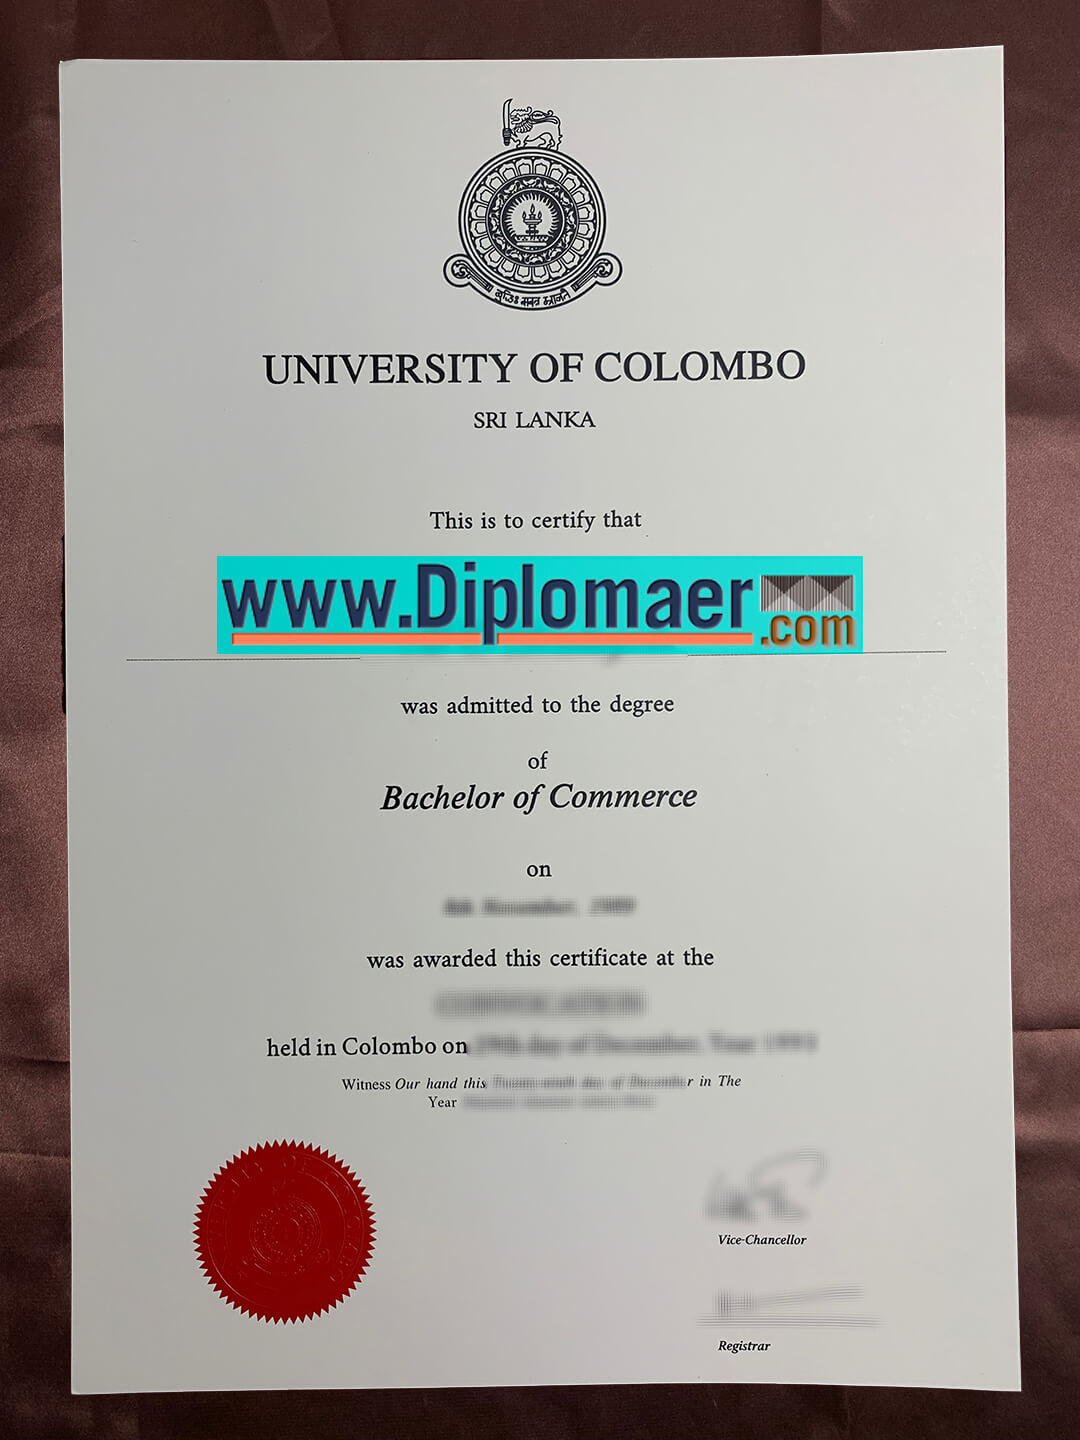 University of Colombo Fake Diploma - Is a University of Colombo diploma worth buying?